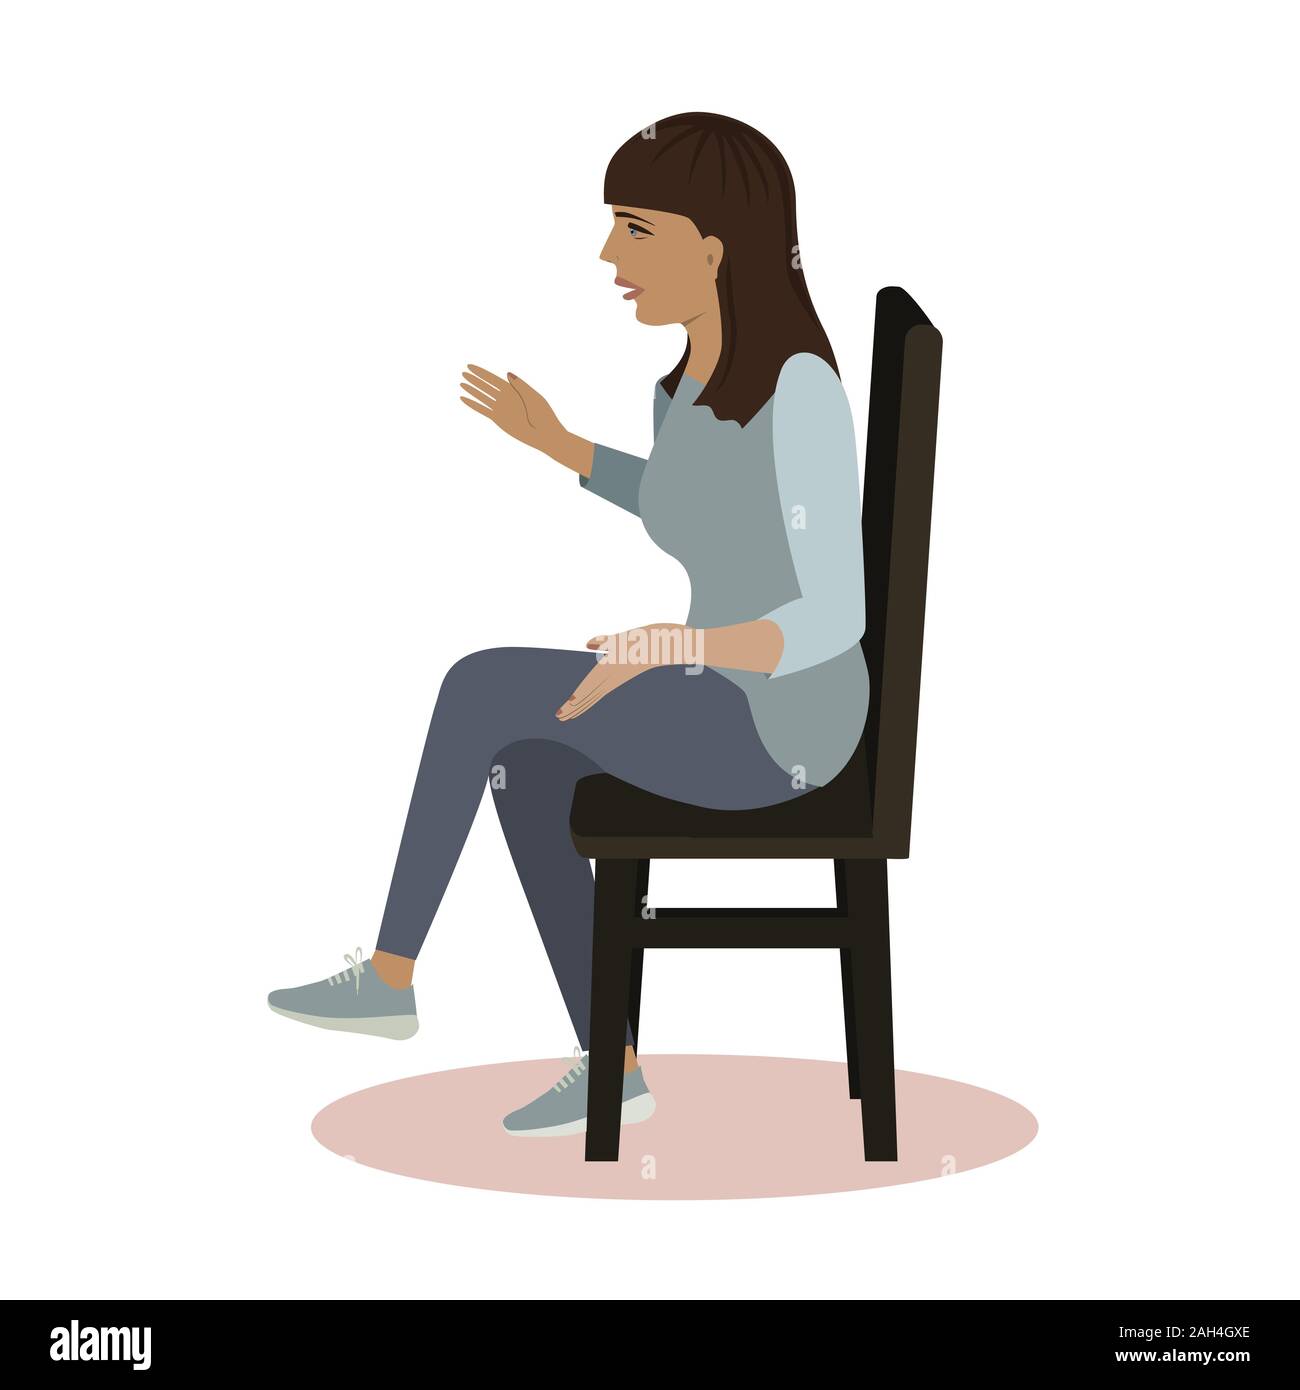 Talking woman seating at the chair. Vector illustration in a flat style isolated on a white background. Stock Vector